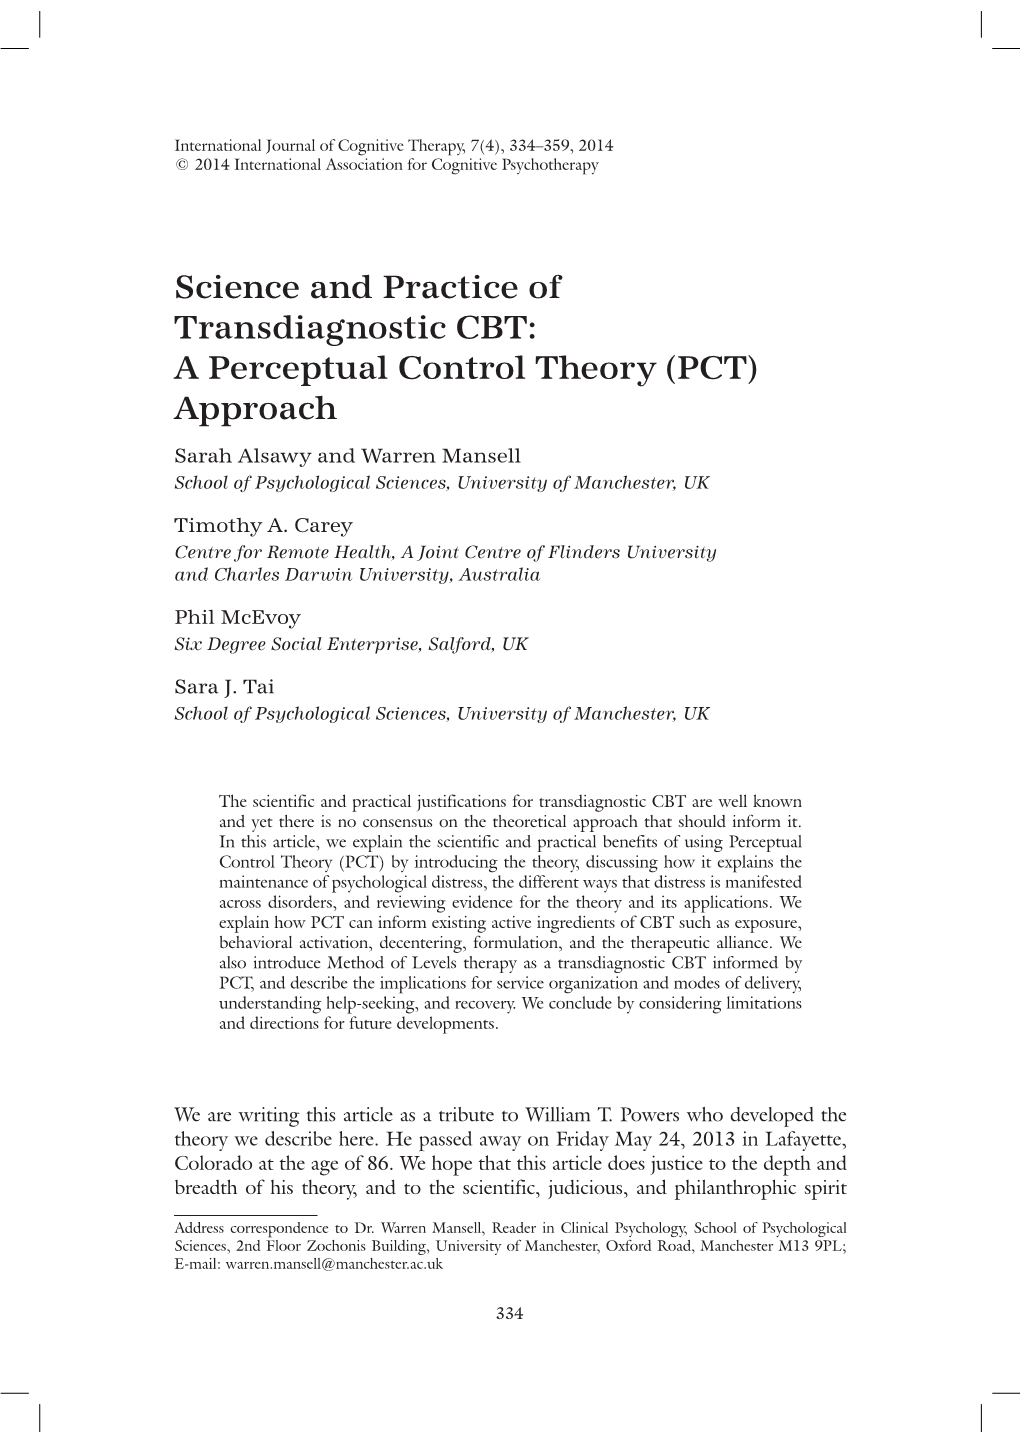 Science and Practice of Transdiagnostic CBT: a Perceptual Control Theory (PCT) Approach